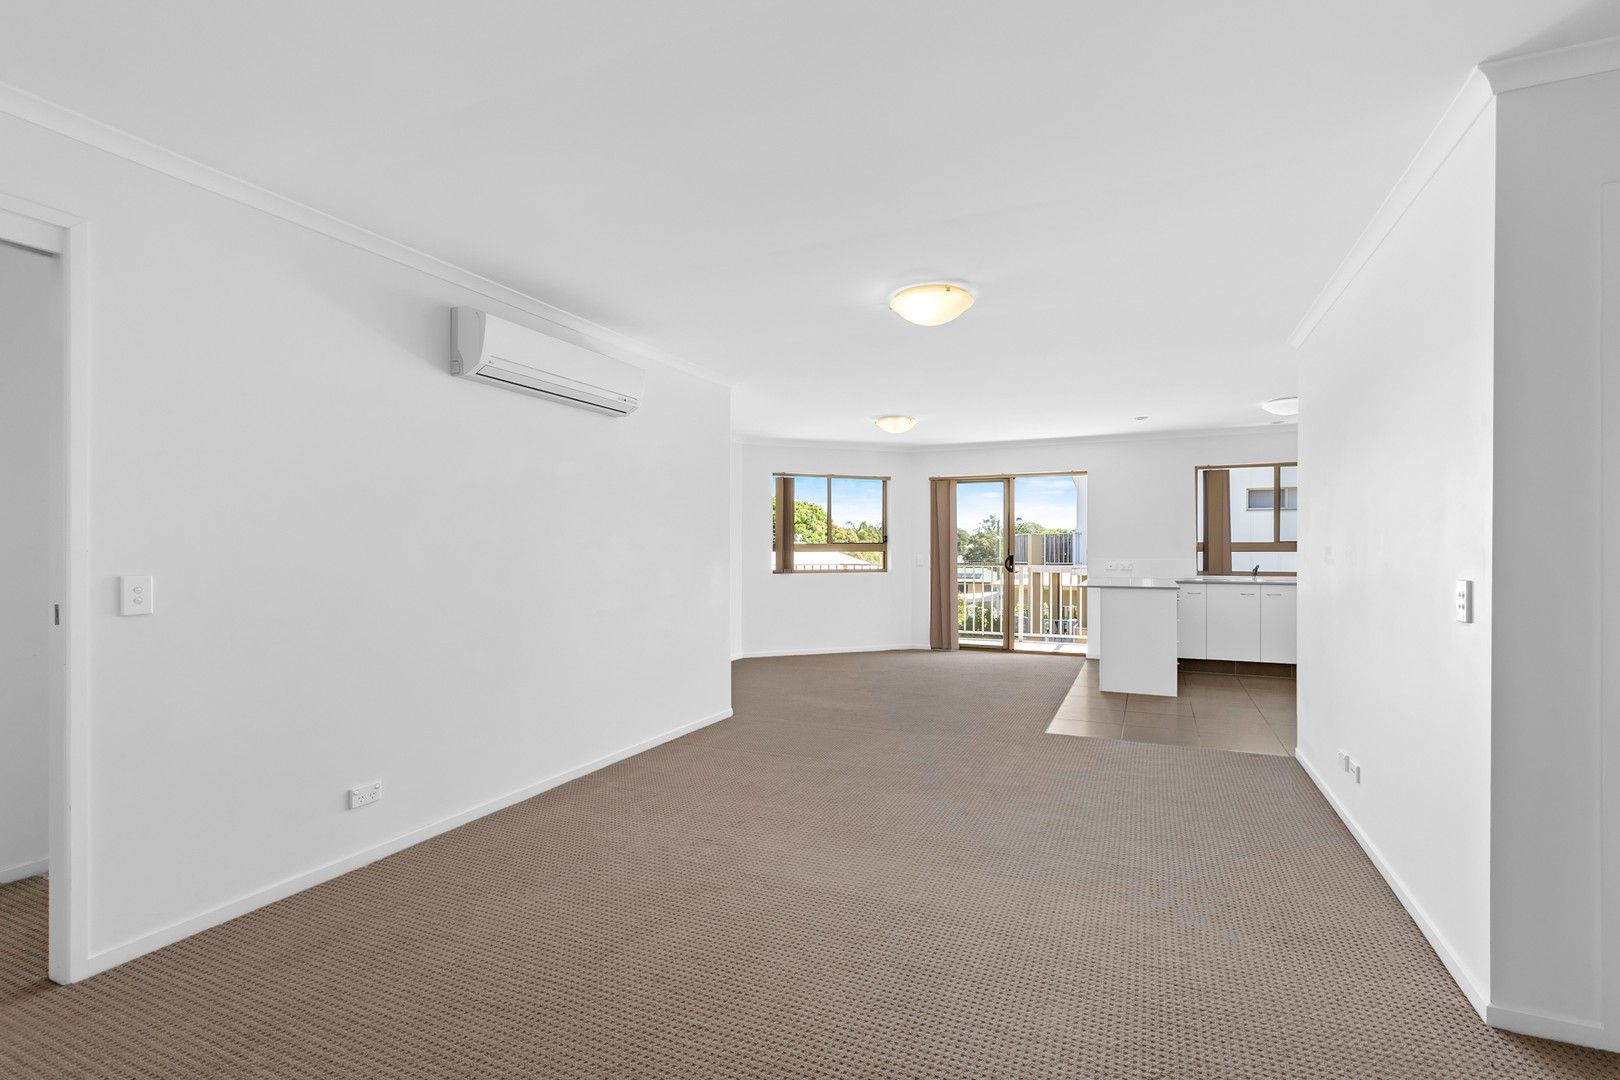 2 bedrooms Apartment / Unit / Flat in 37/1-11 Gona Street BEENLEIGH QLD, 4207